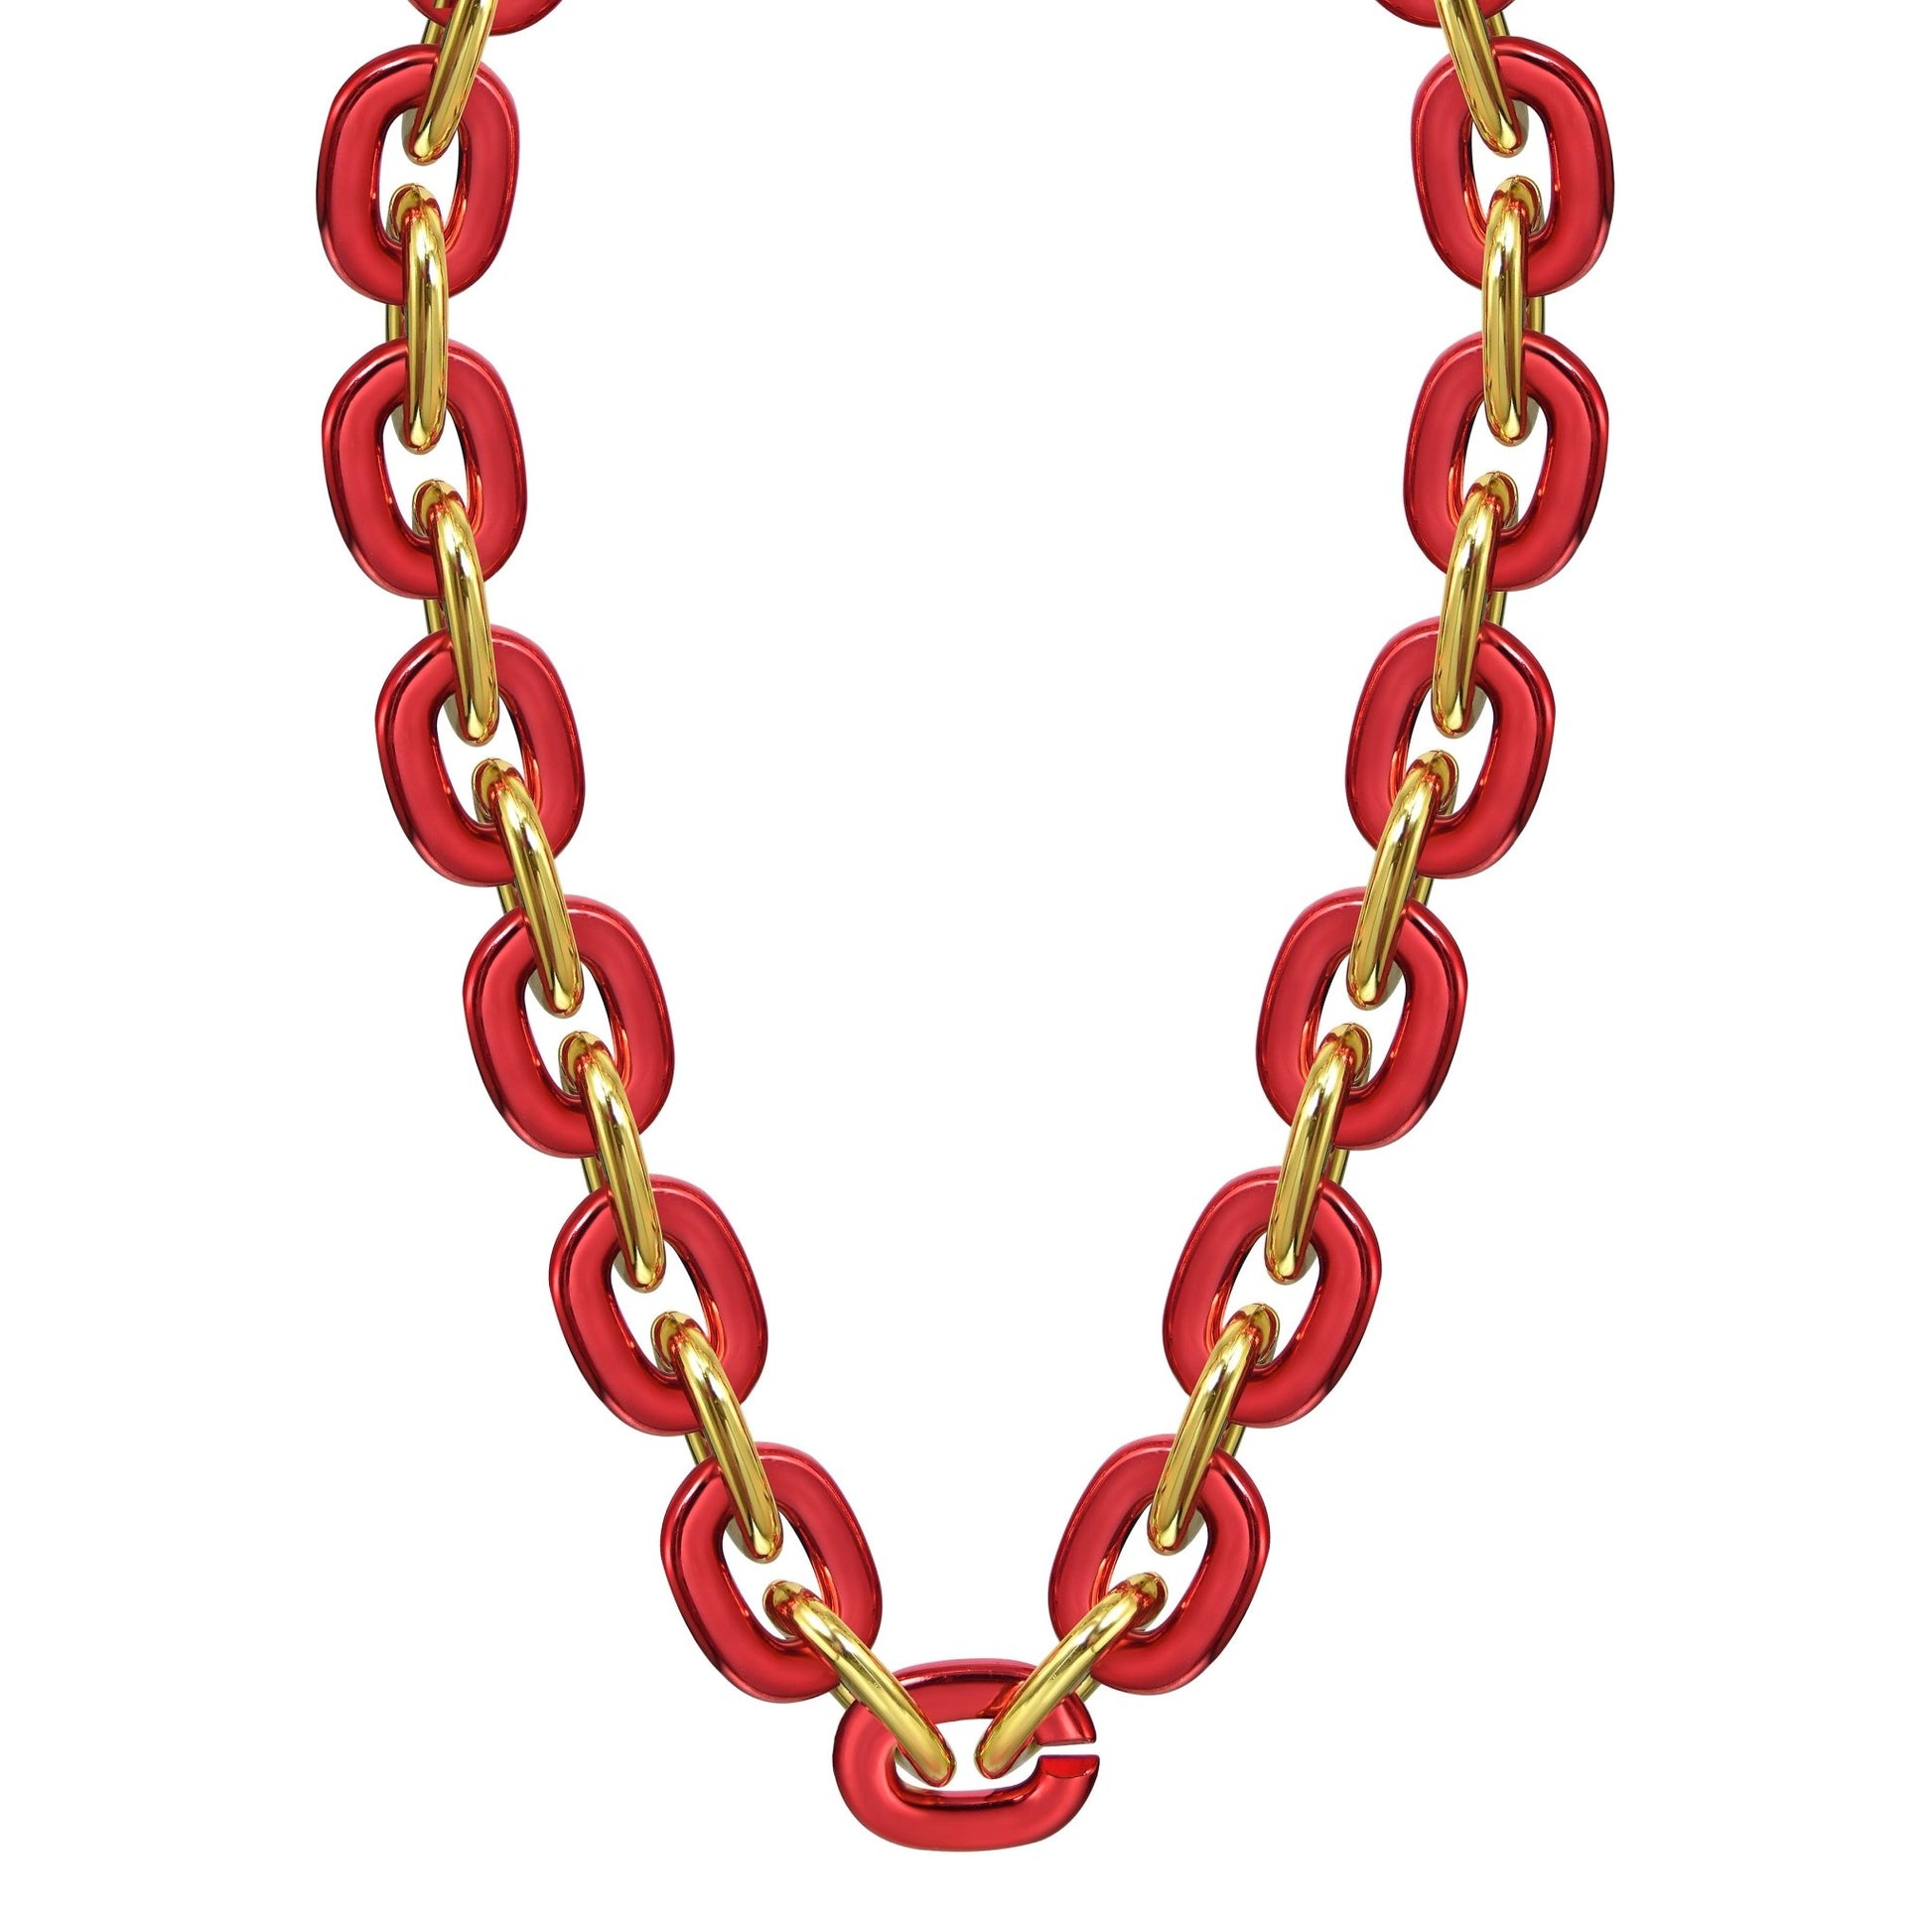 Jumbo Fan Chain Necklace - Gamedays Gear - Red / Gold